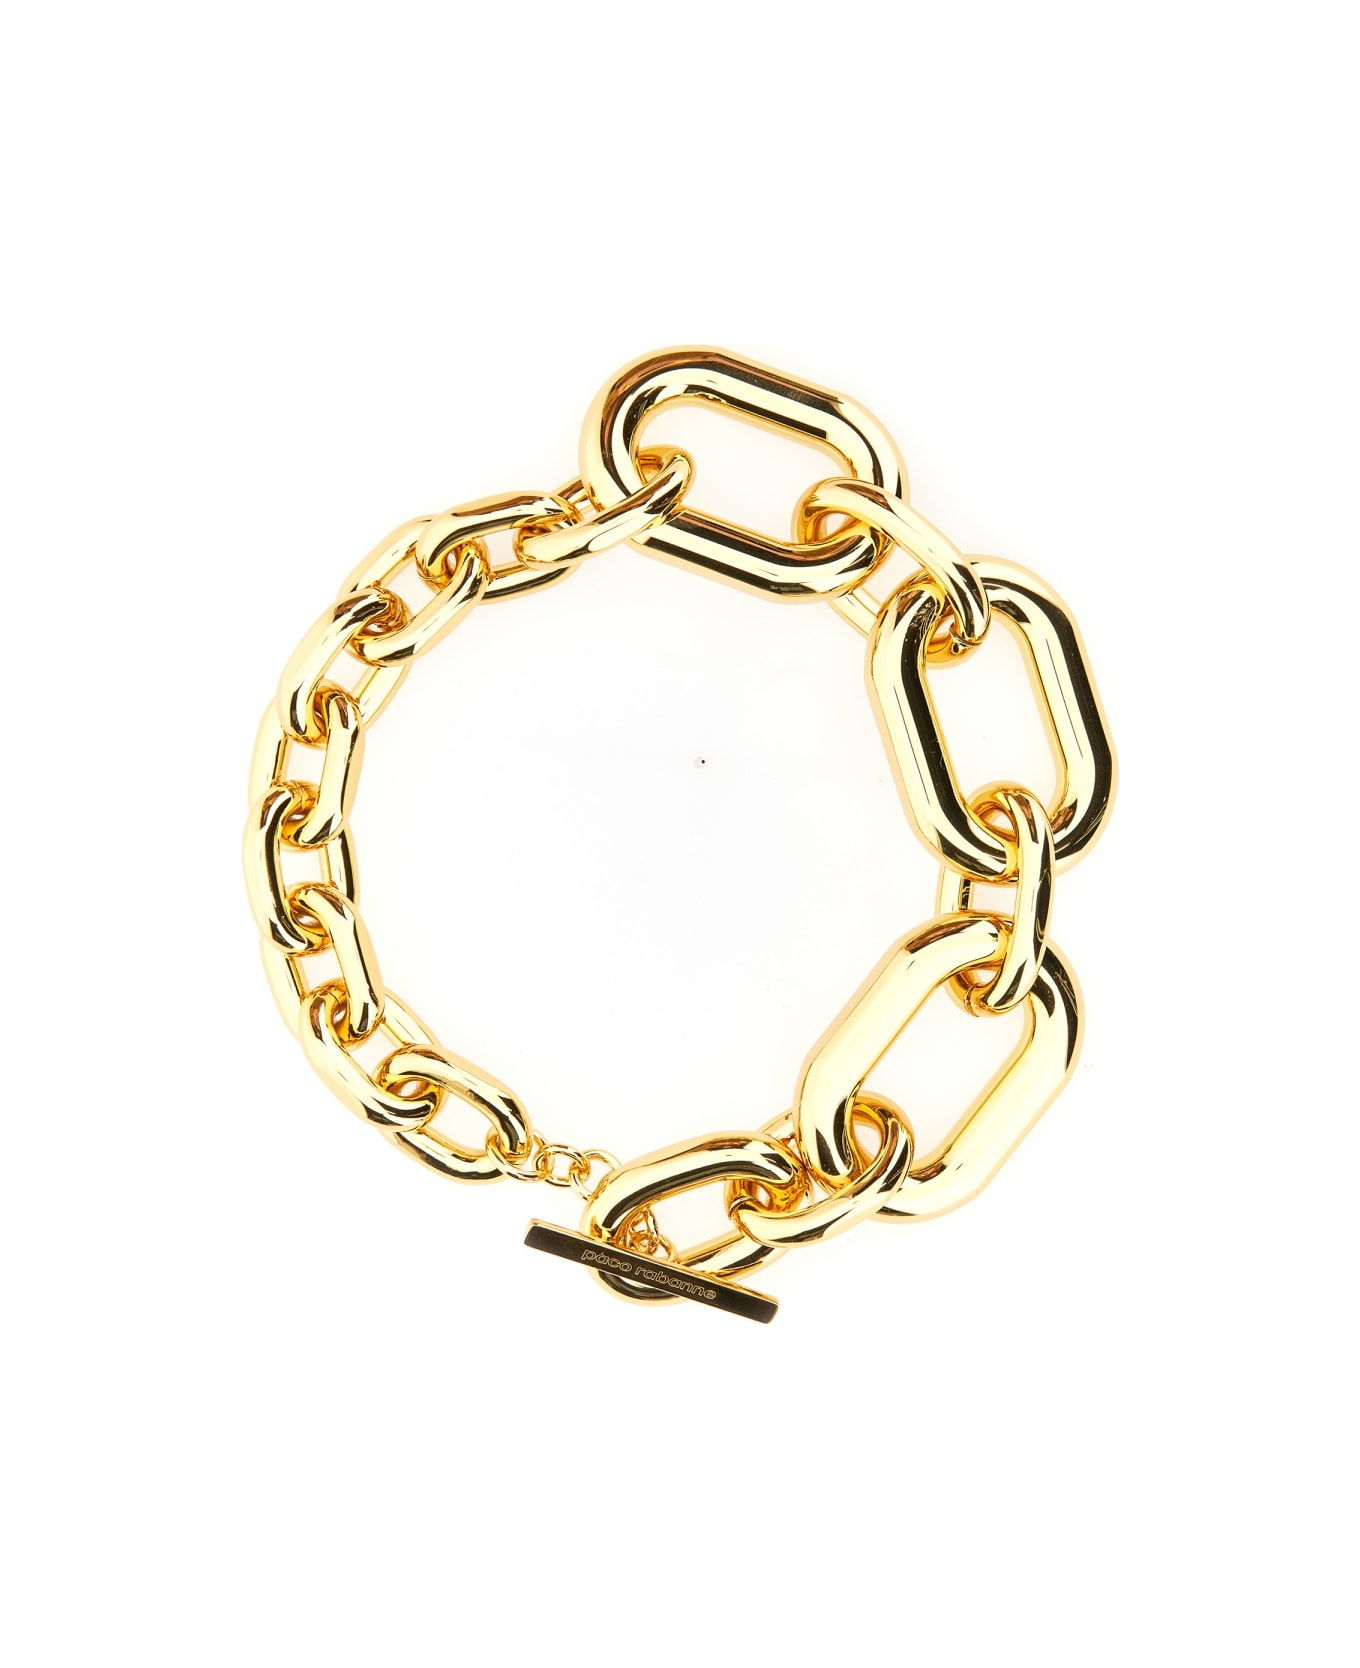 Paco Rabanne "xl Link" Necklace - GOLD ネックレス